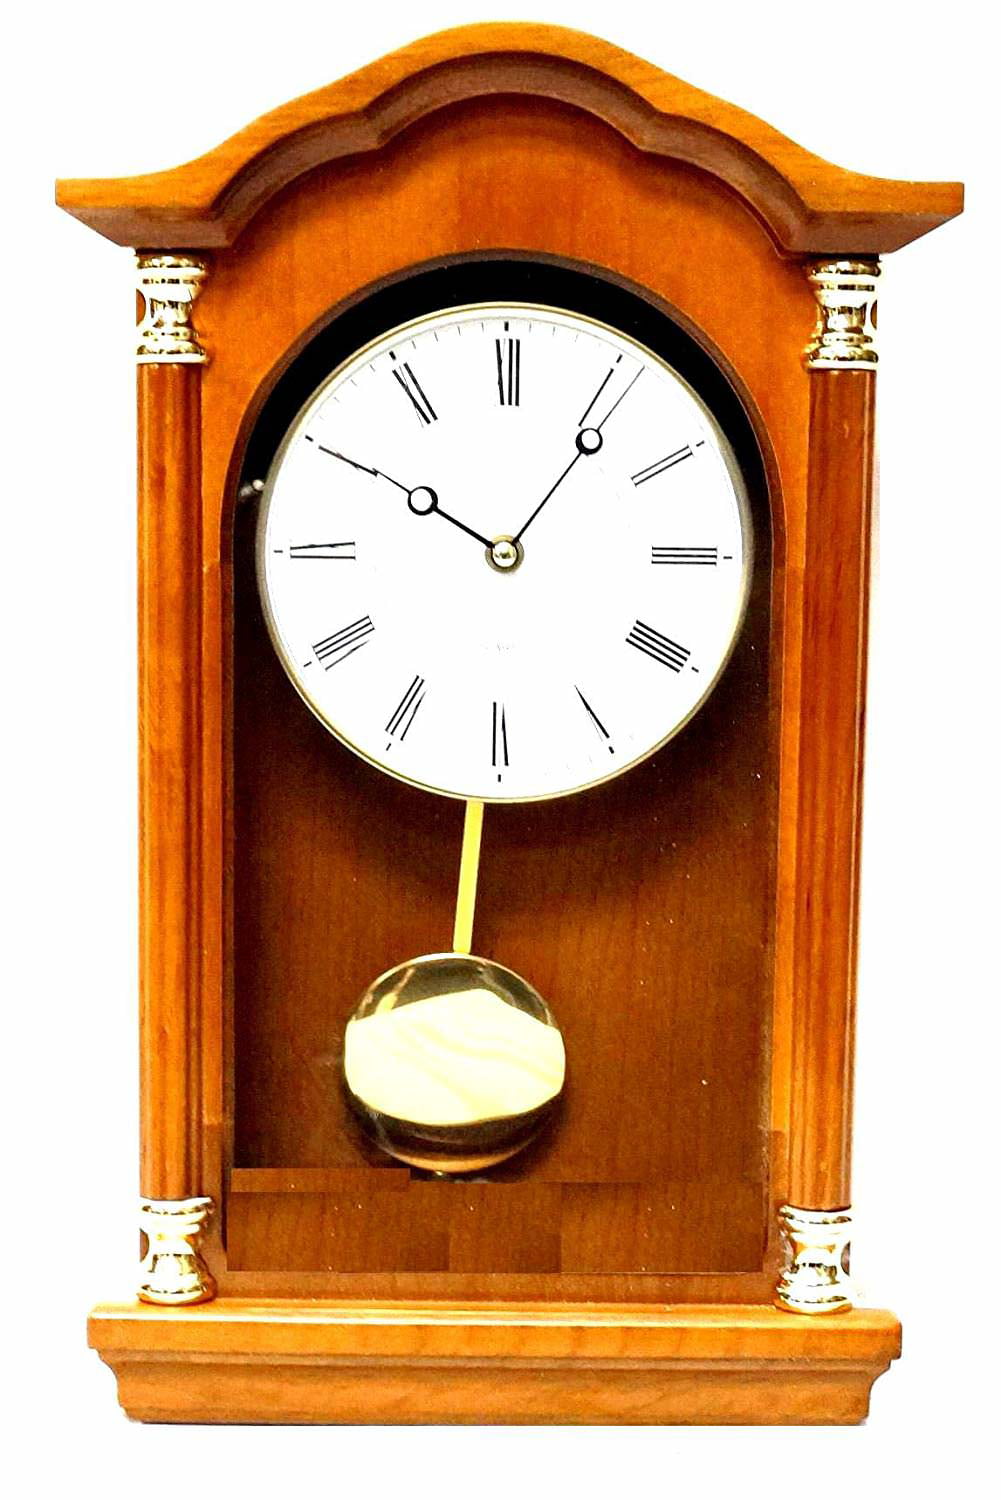 A Friend in Need is A Friend Indeed Clock Large Vintage Round Wooden Clock Silent Non Ticking Battery Operated Clock Rustic Clock Farmhouse Clock Home Decor Living Room 12 Inch